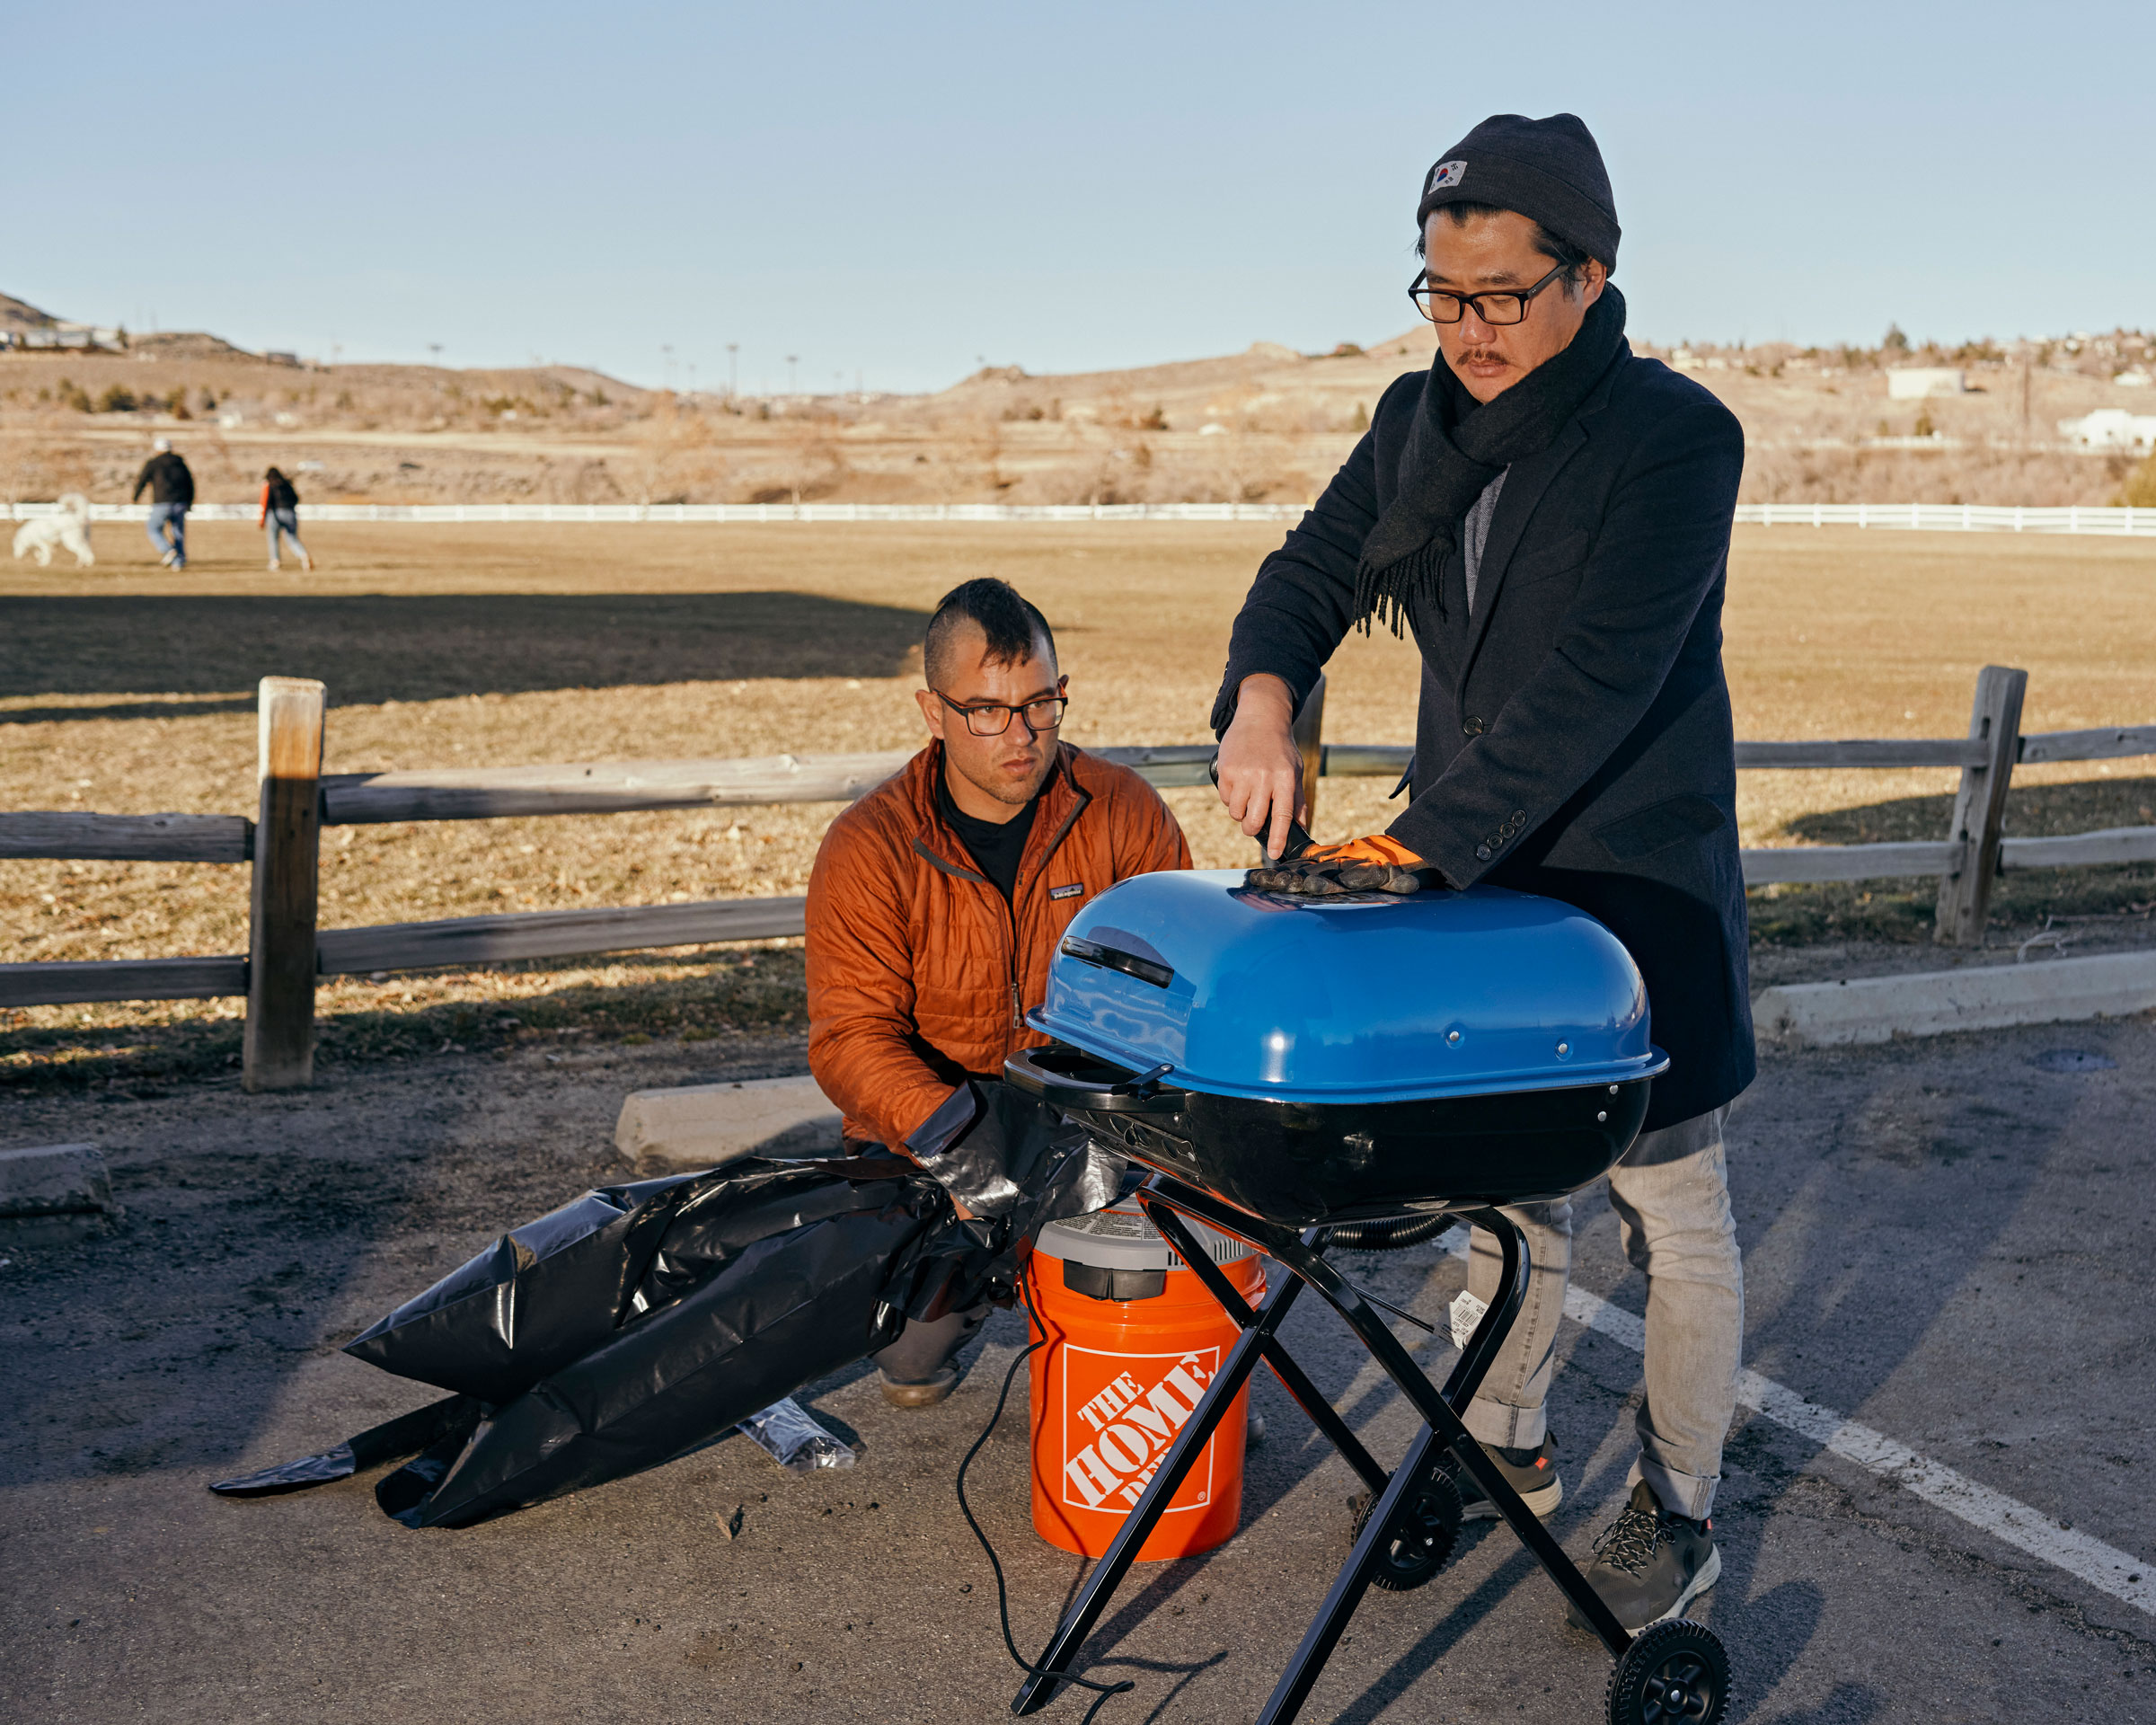 Founder Luke Iseman and co-founder Andrew Song of solar geoengineering startup Make Sunsets use a grill to burn sulfate powder and capture the generated gases in a plastic bag at a park in Reno, Nevada, United States on February 12, 2023.